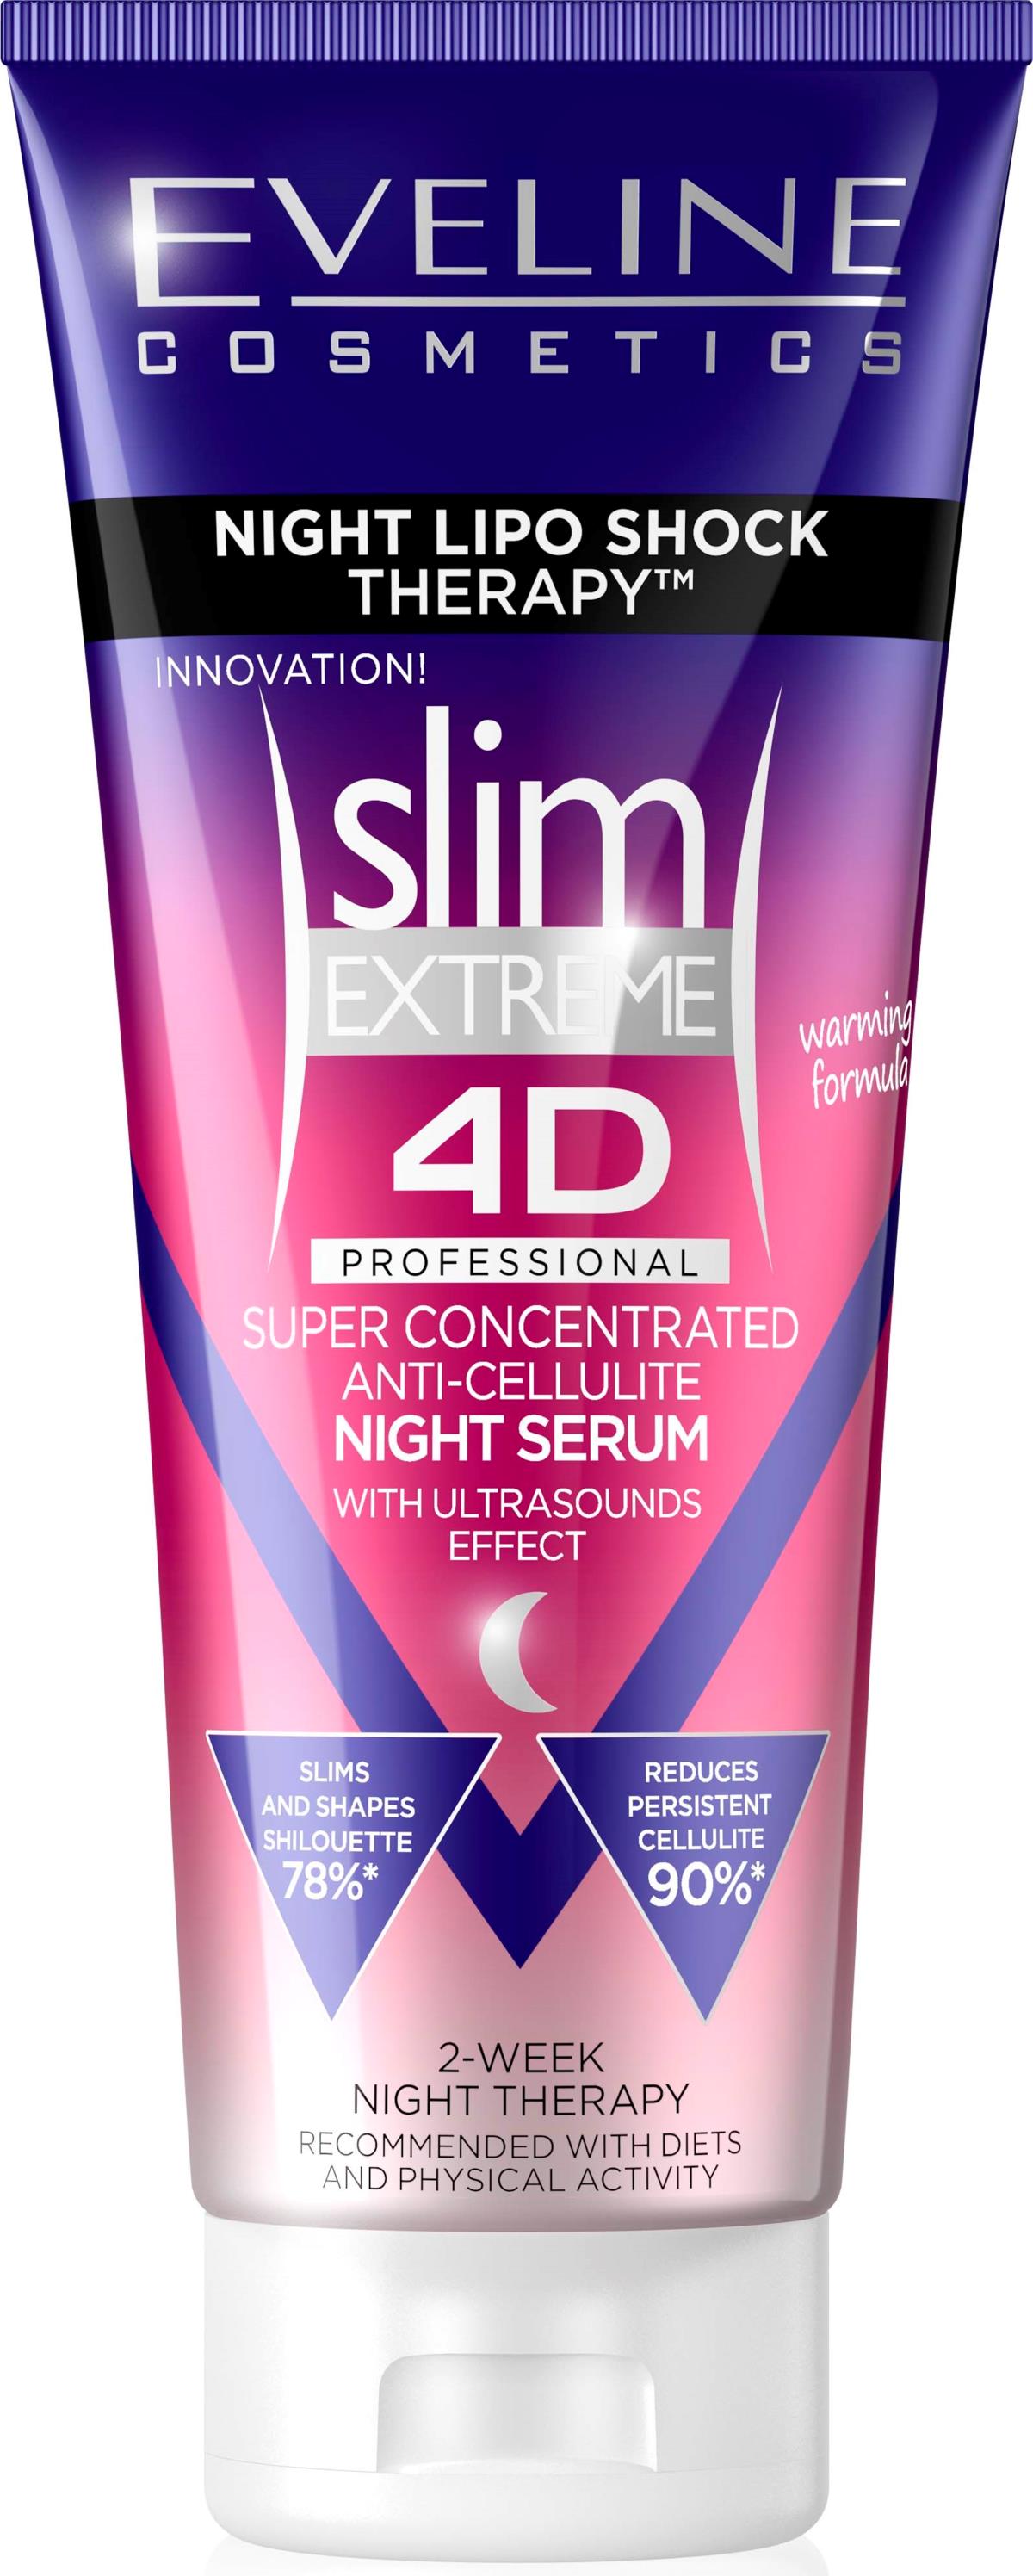 Eveline Cosmetics Slim Extreme 4d Professional Night Lipo Shock Therapy Super Concentrated Anti